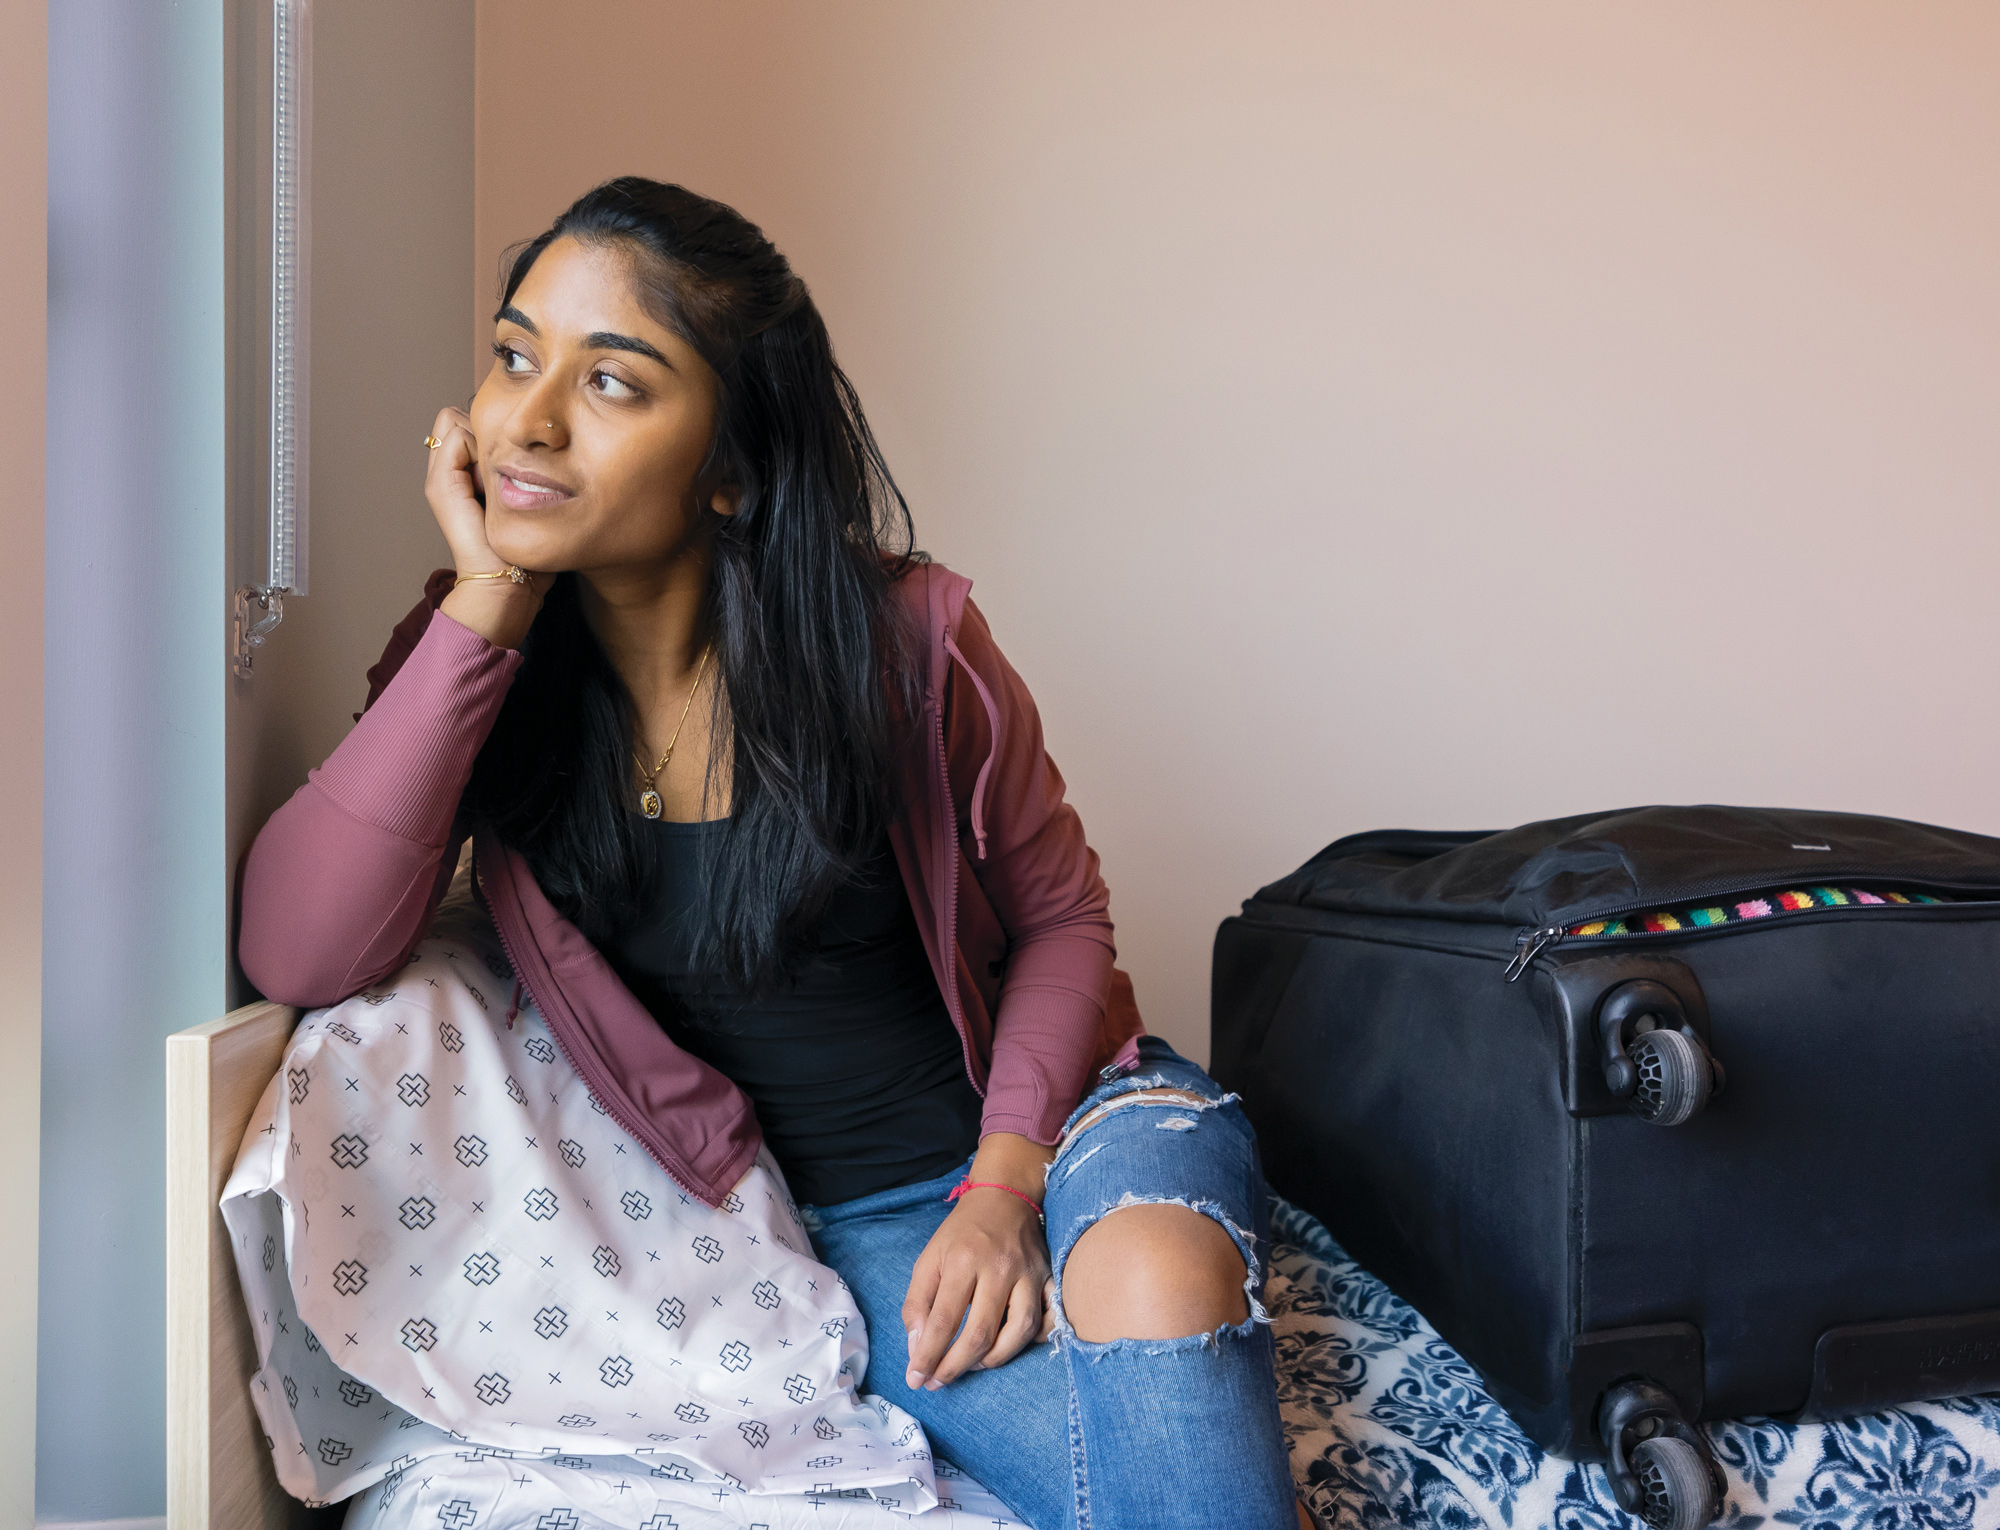 First-year student Reva Birla, in a black shirt, mauve hoodie and ripped blue jeans, is sitting on the side of her bed next to a large, black suitcase and looking out the window of her dorm room.